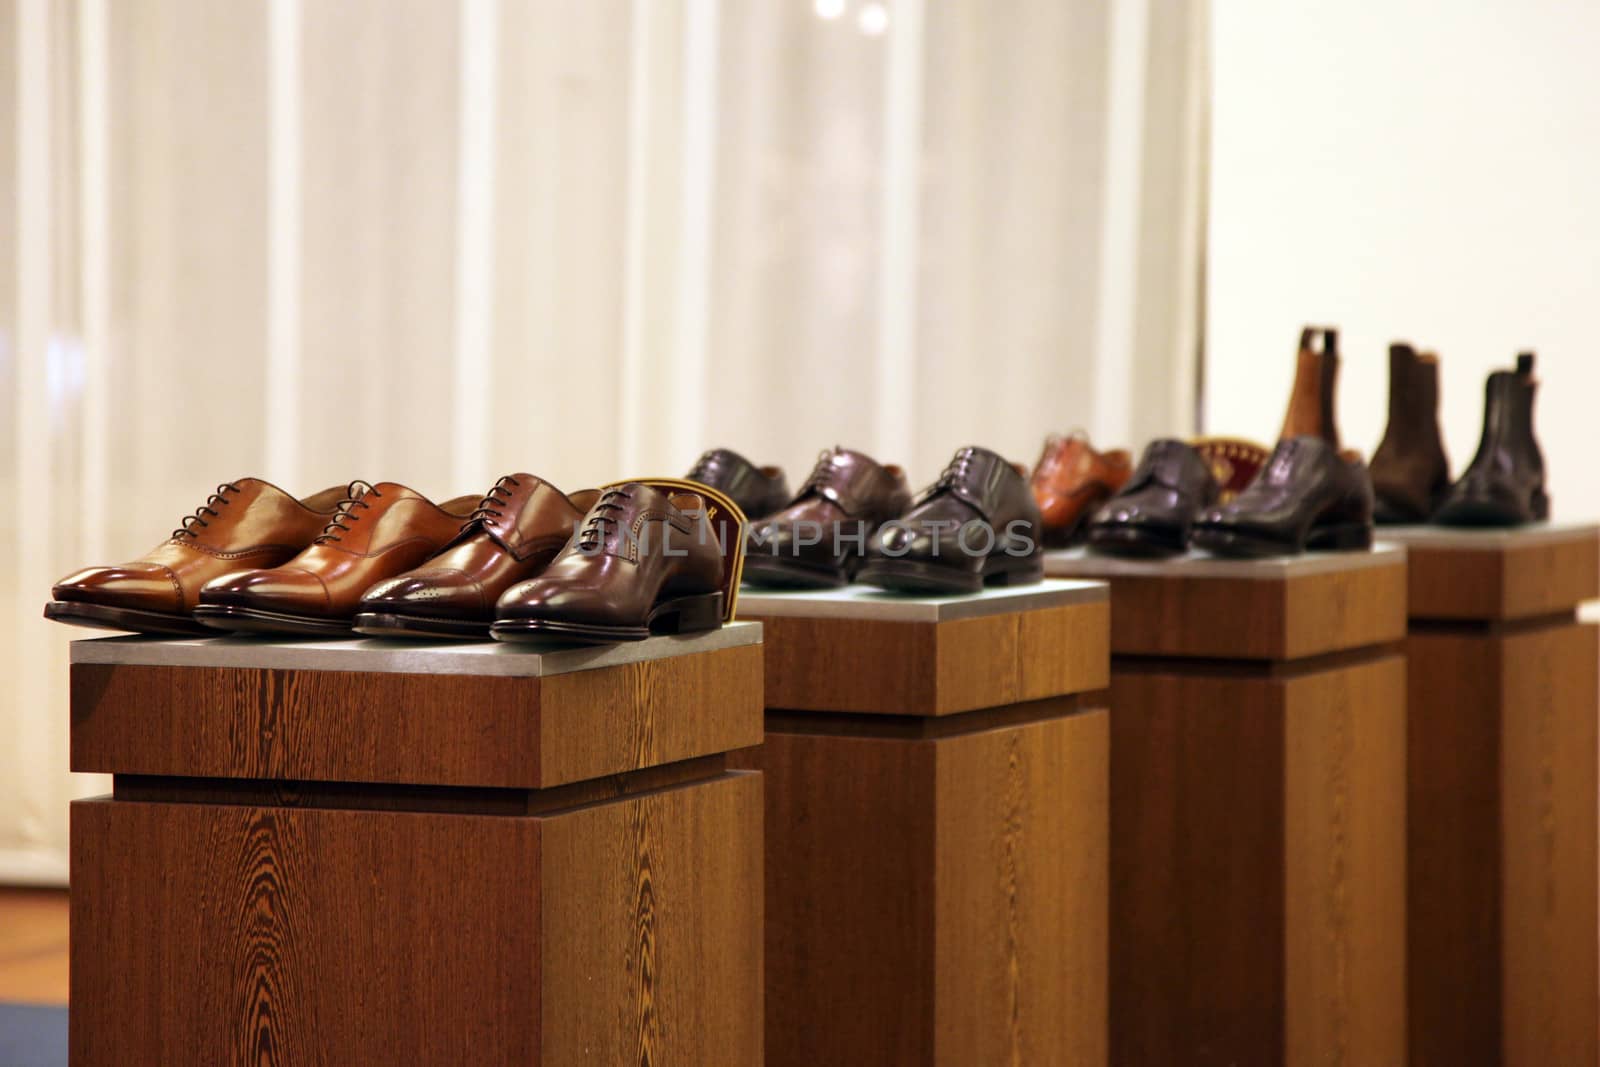 Mens shoes in a store display arranged in neat rows on top of four wooden cabinets